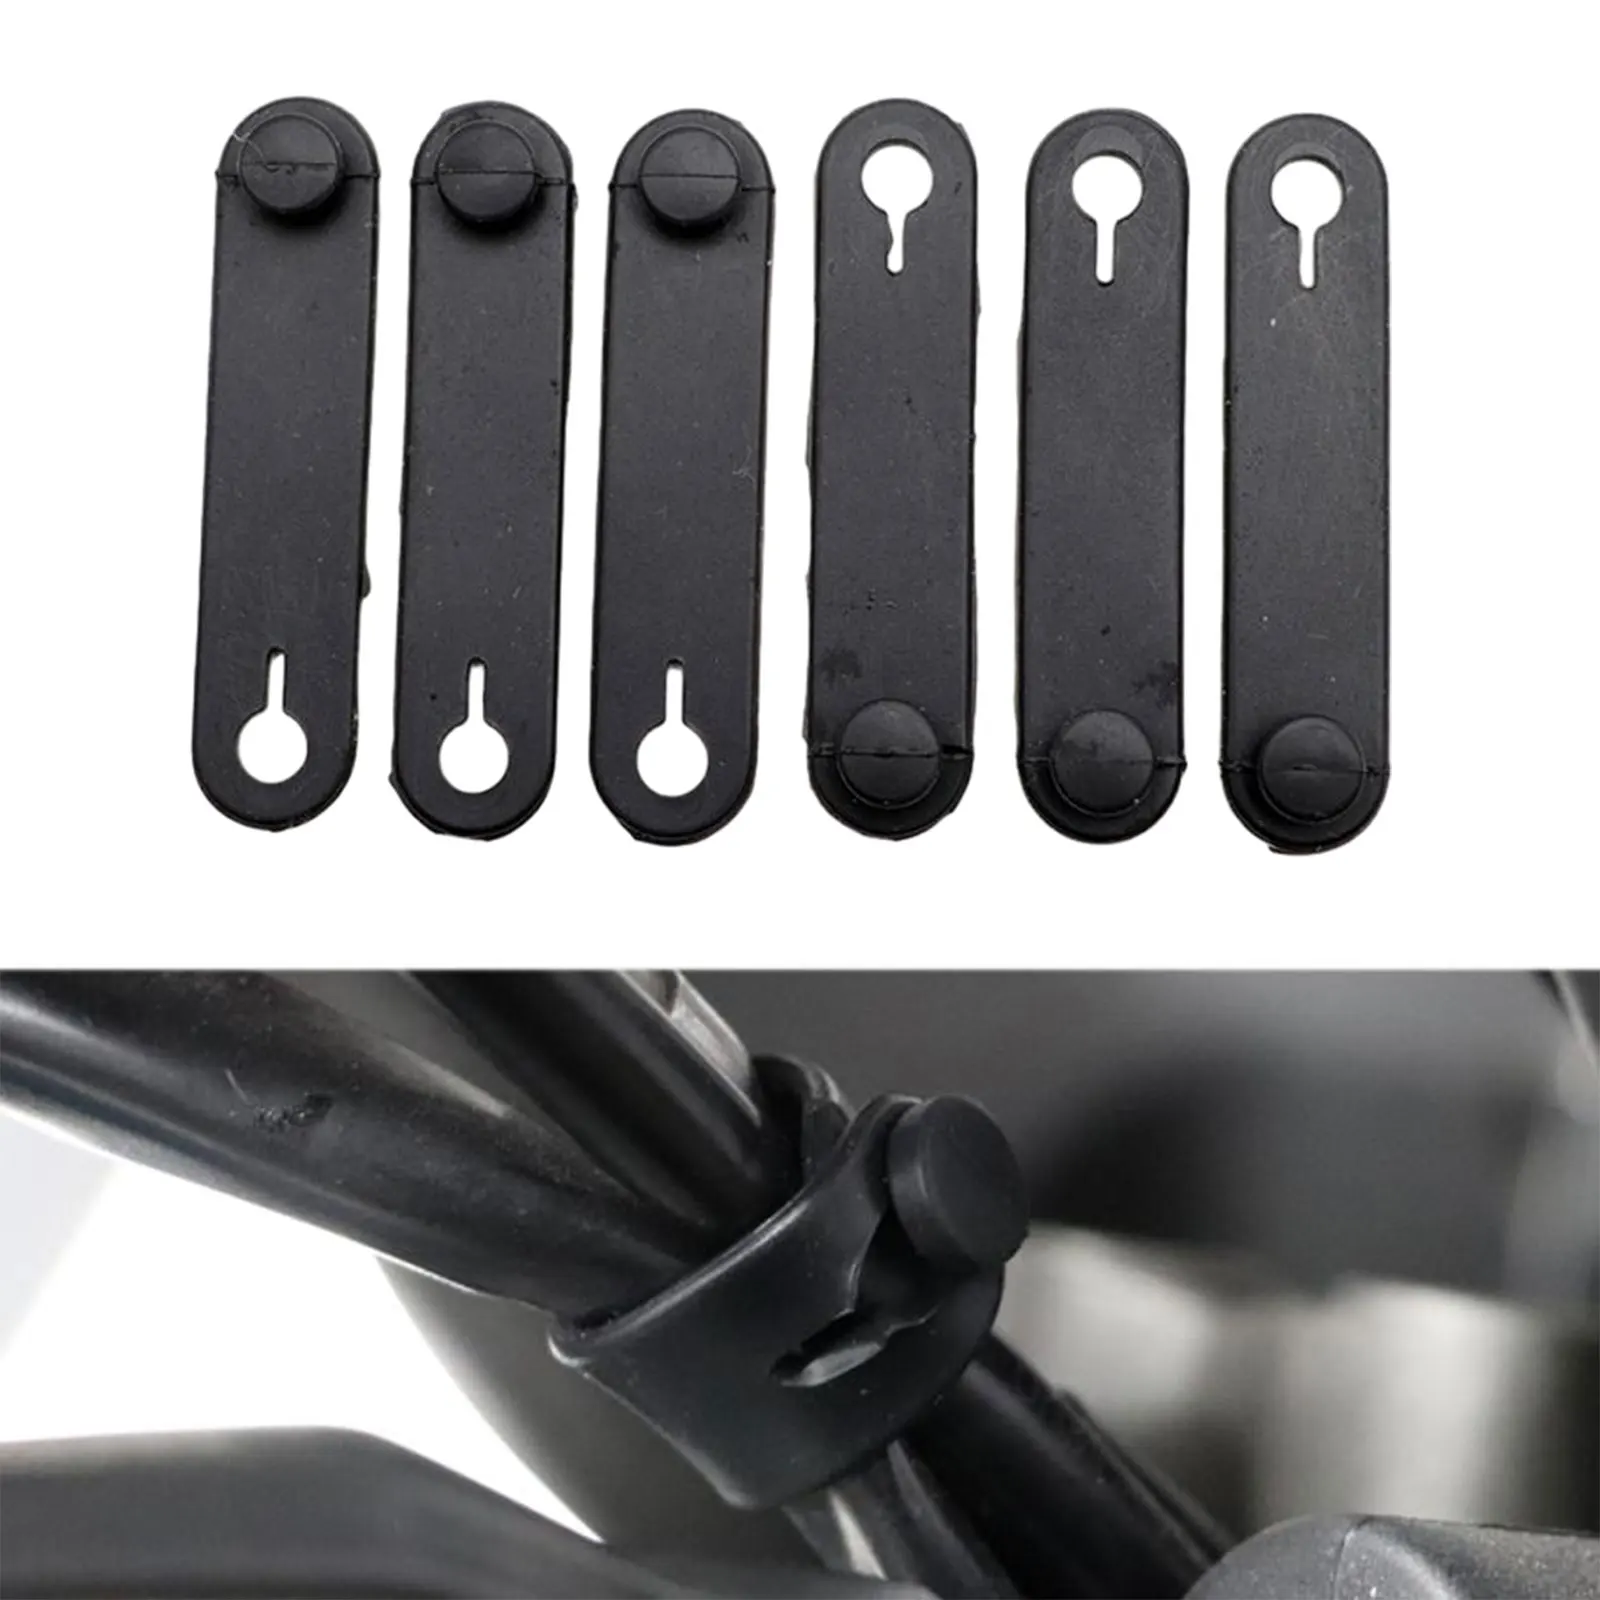 6pcs Motorcycle Rubber Frame Securing Cable Wiring Harness For Bmw R 1250 Gs Adventure Hornet Ktm Exc Accessories